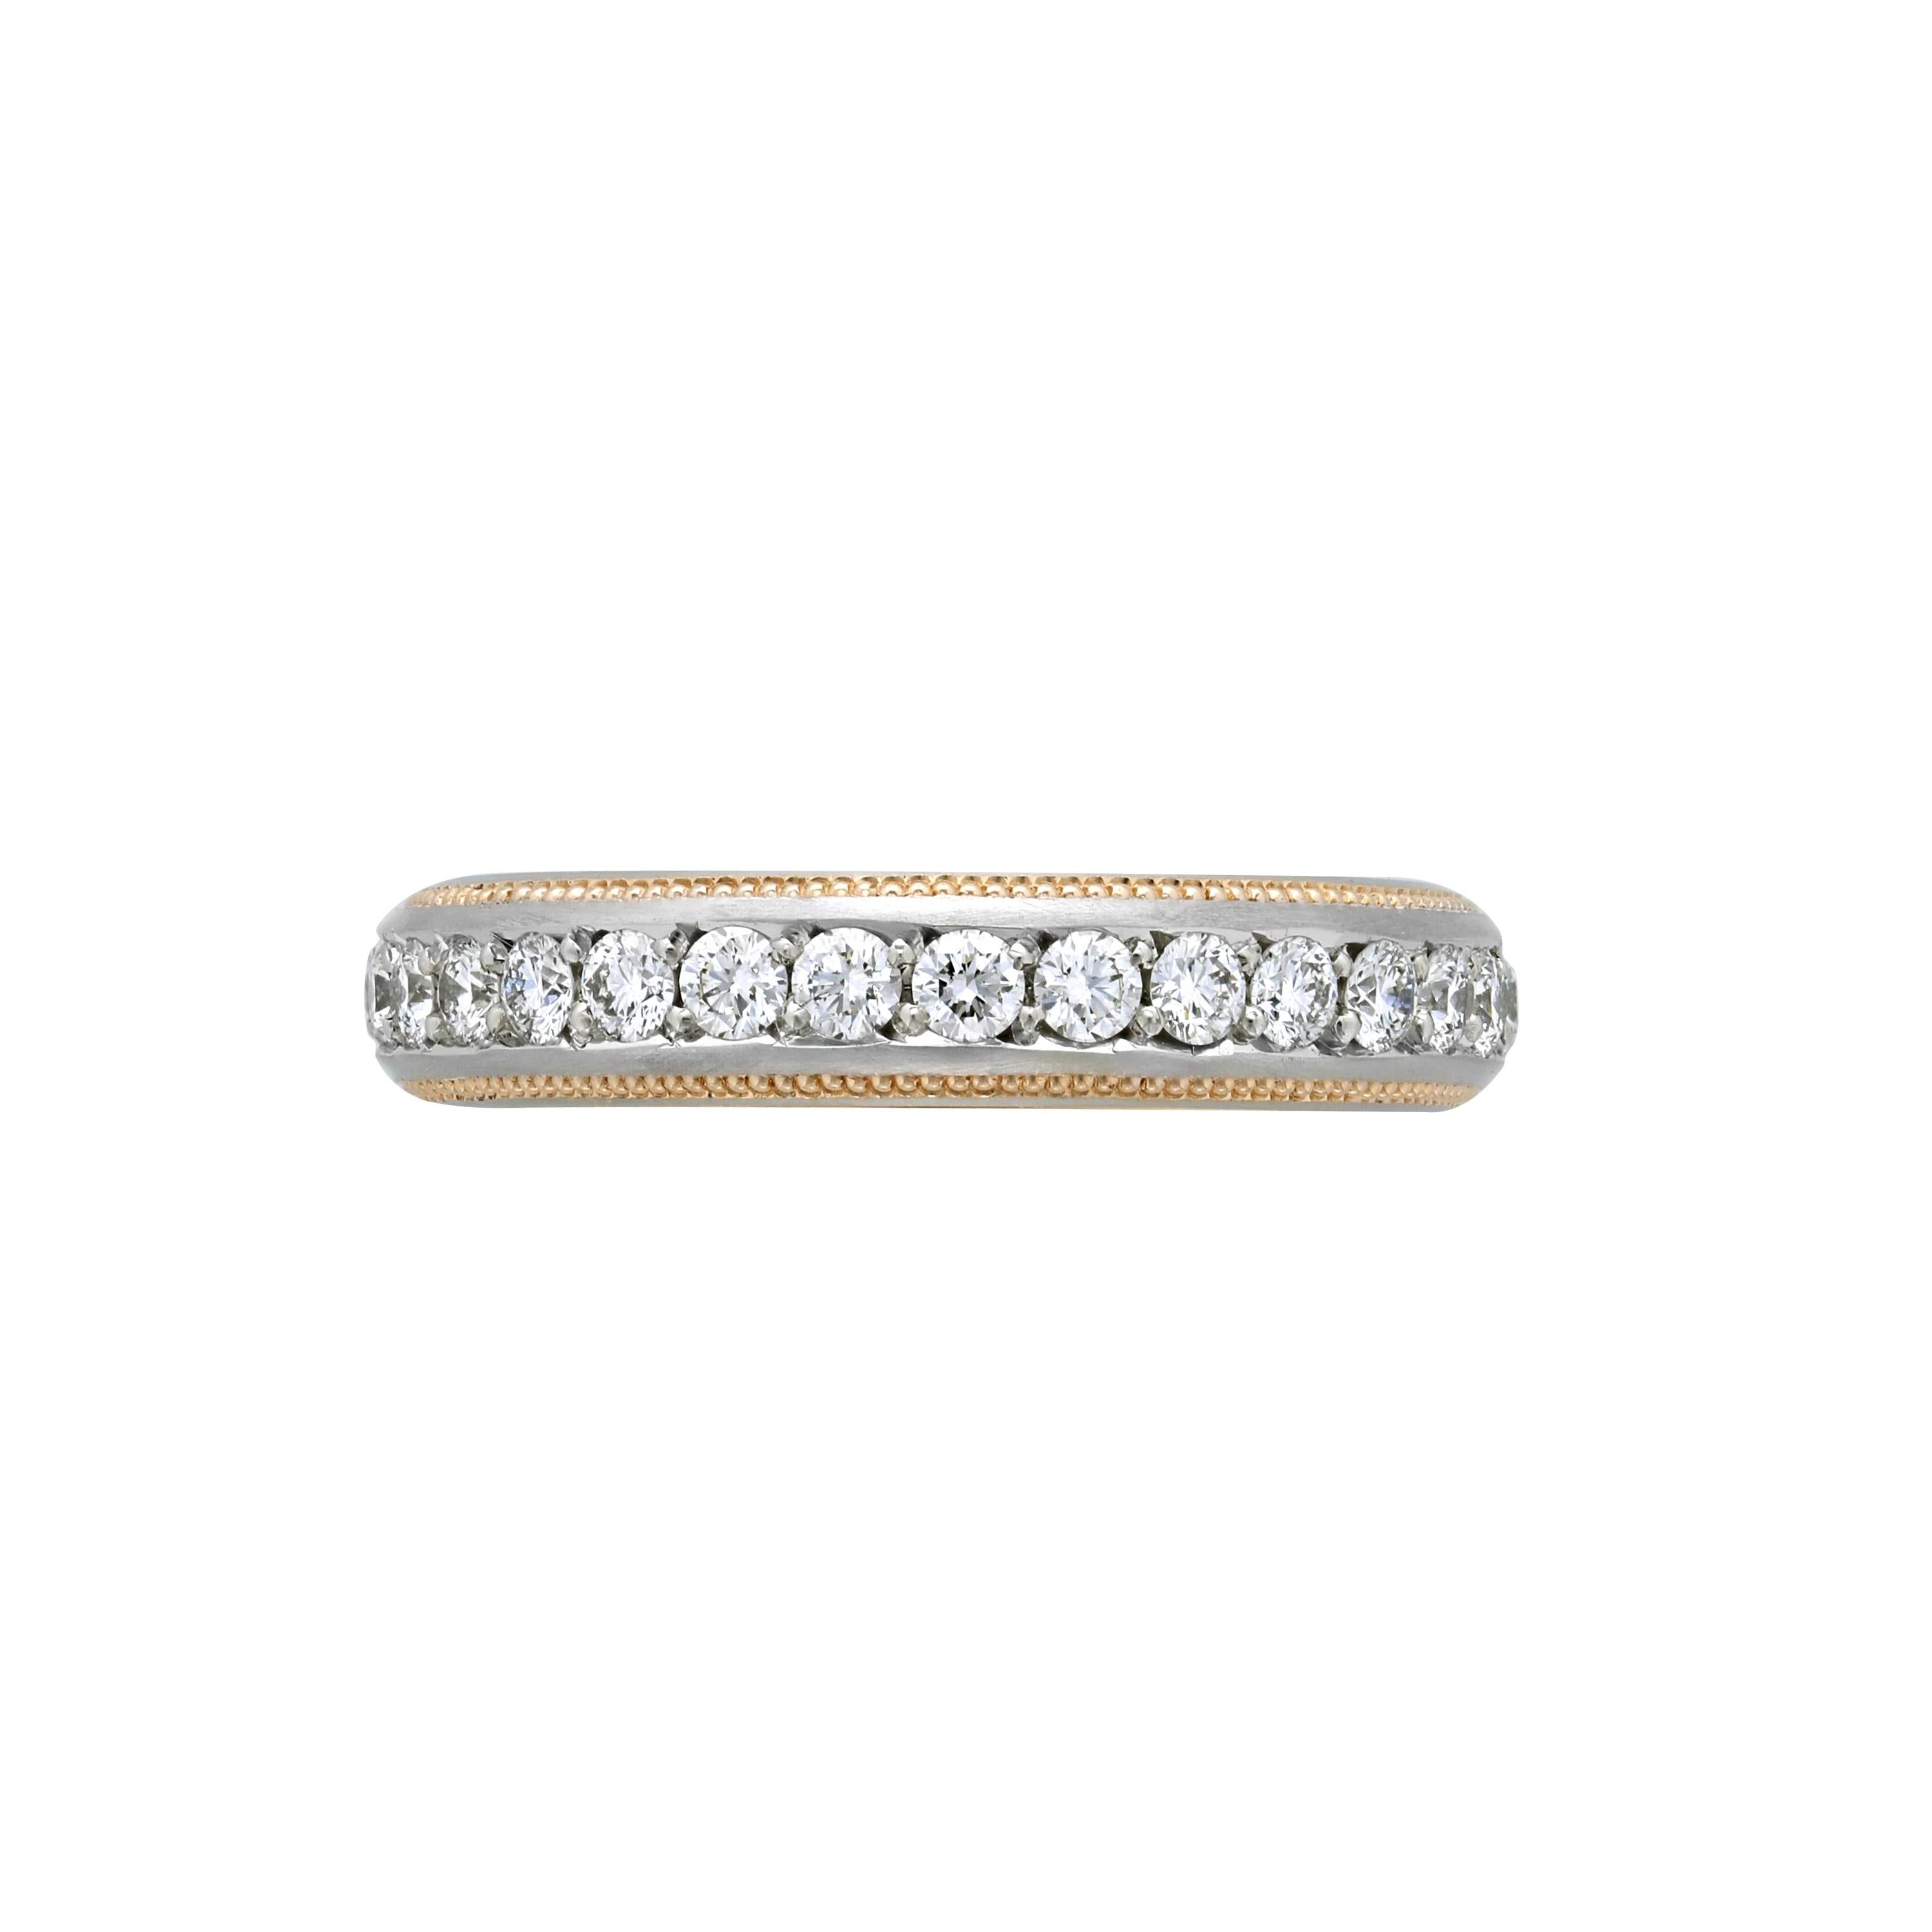 Classic Diamond eternity band with the Zoltan David flair - two lines of 20K Rose Gold on each side of the round brilliant Diamonds and a Rose Gold inner sleeve. .87 ct. total of DEF color / Internally Flawless to VVS clarity Ideal cut Diamonds.